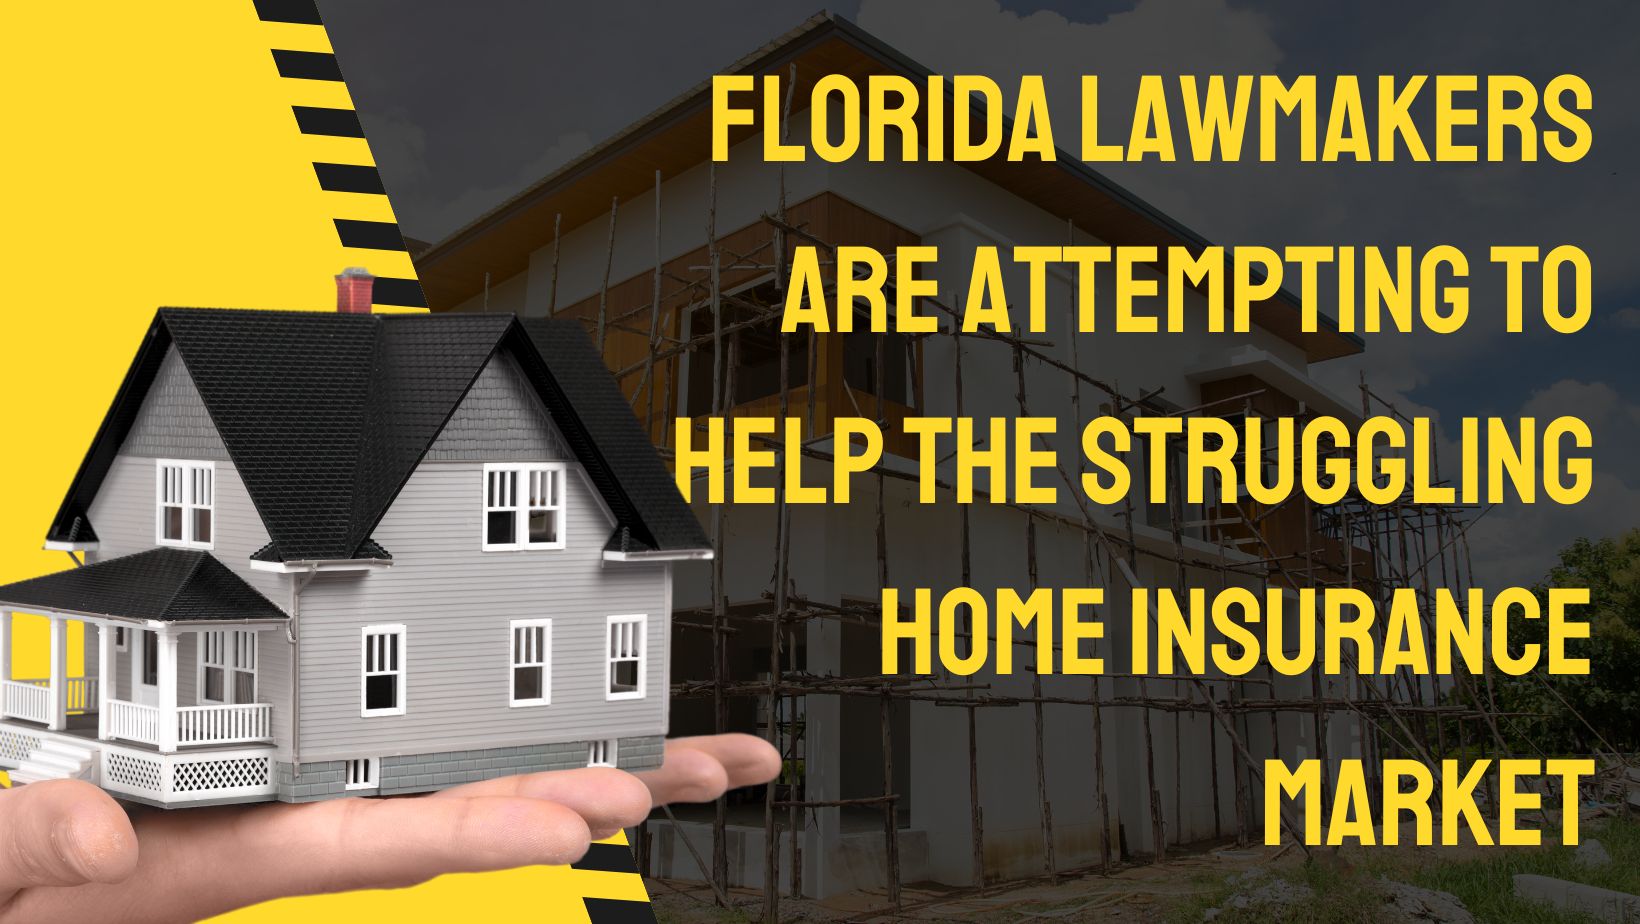 Florida Lawmakers are Attempting to Help the Struggling Home Insurance Market